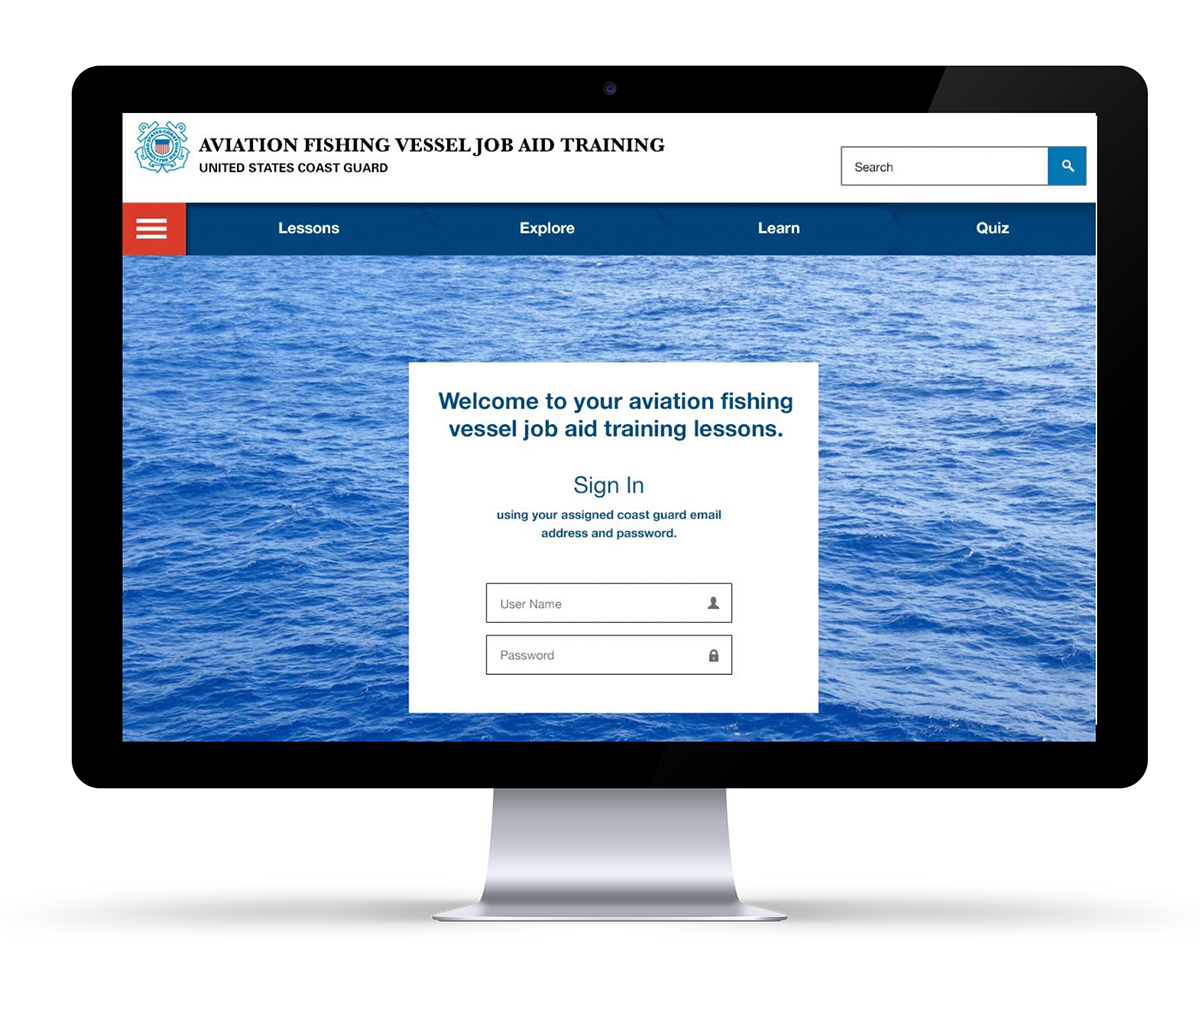 coast guard Website Education Lesson plan USCG Web user experience user interface interface design lesson united states usa pilots Fishing Vessels Vessel Spotting